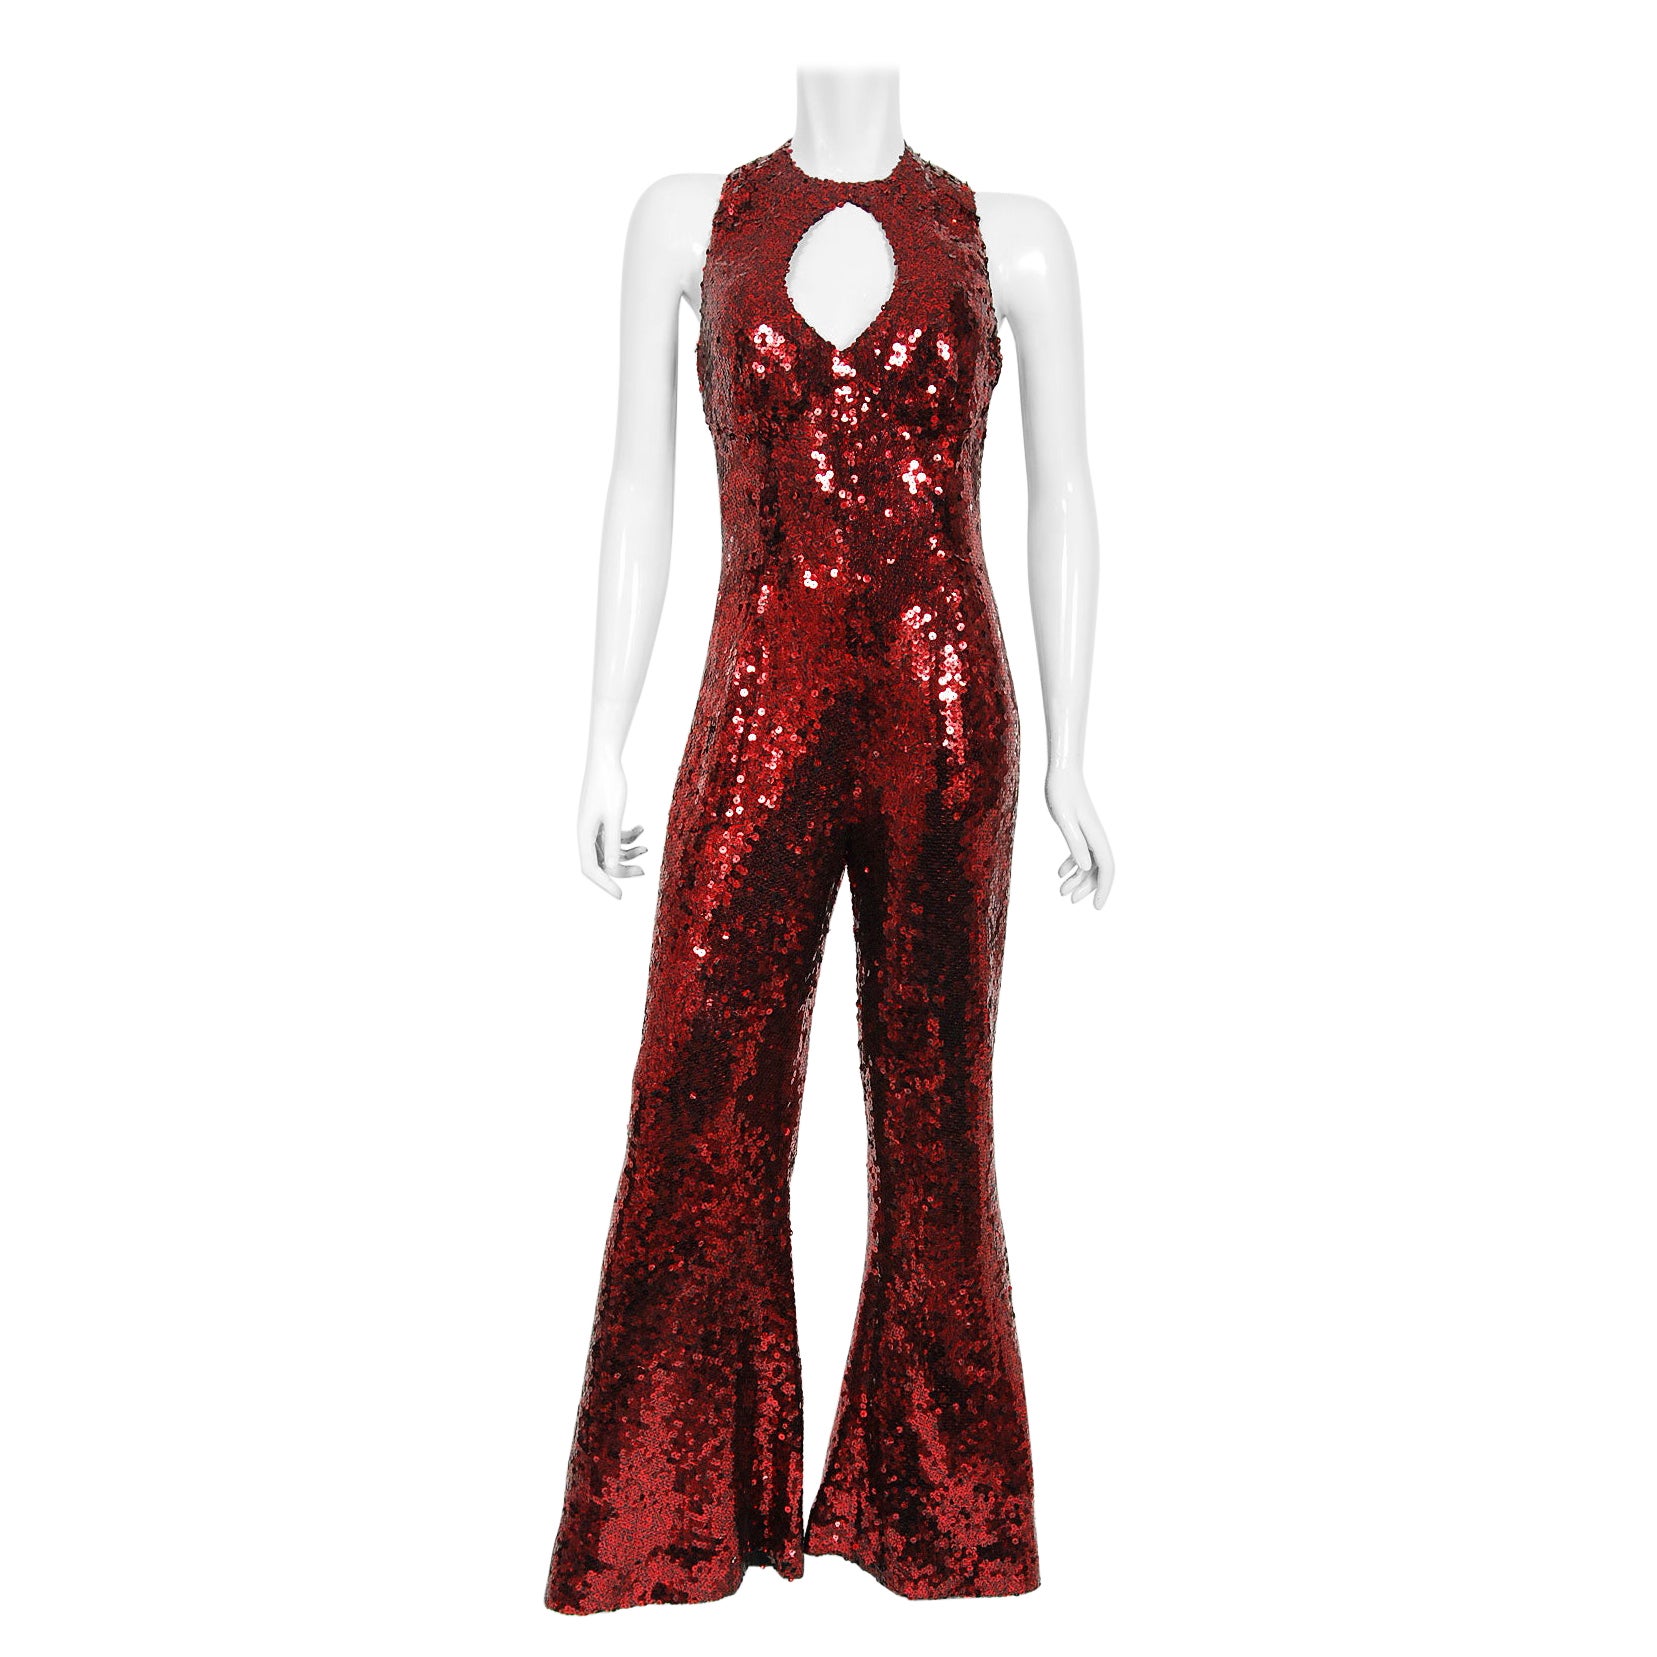 Vintage 1970s Liza Minnell Owned Red Sequin Stretch Knit Key-Hole Disco Jumpsuit